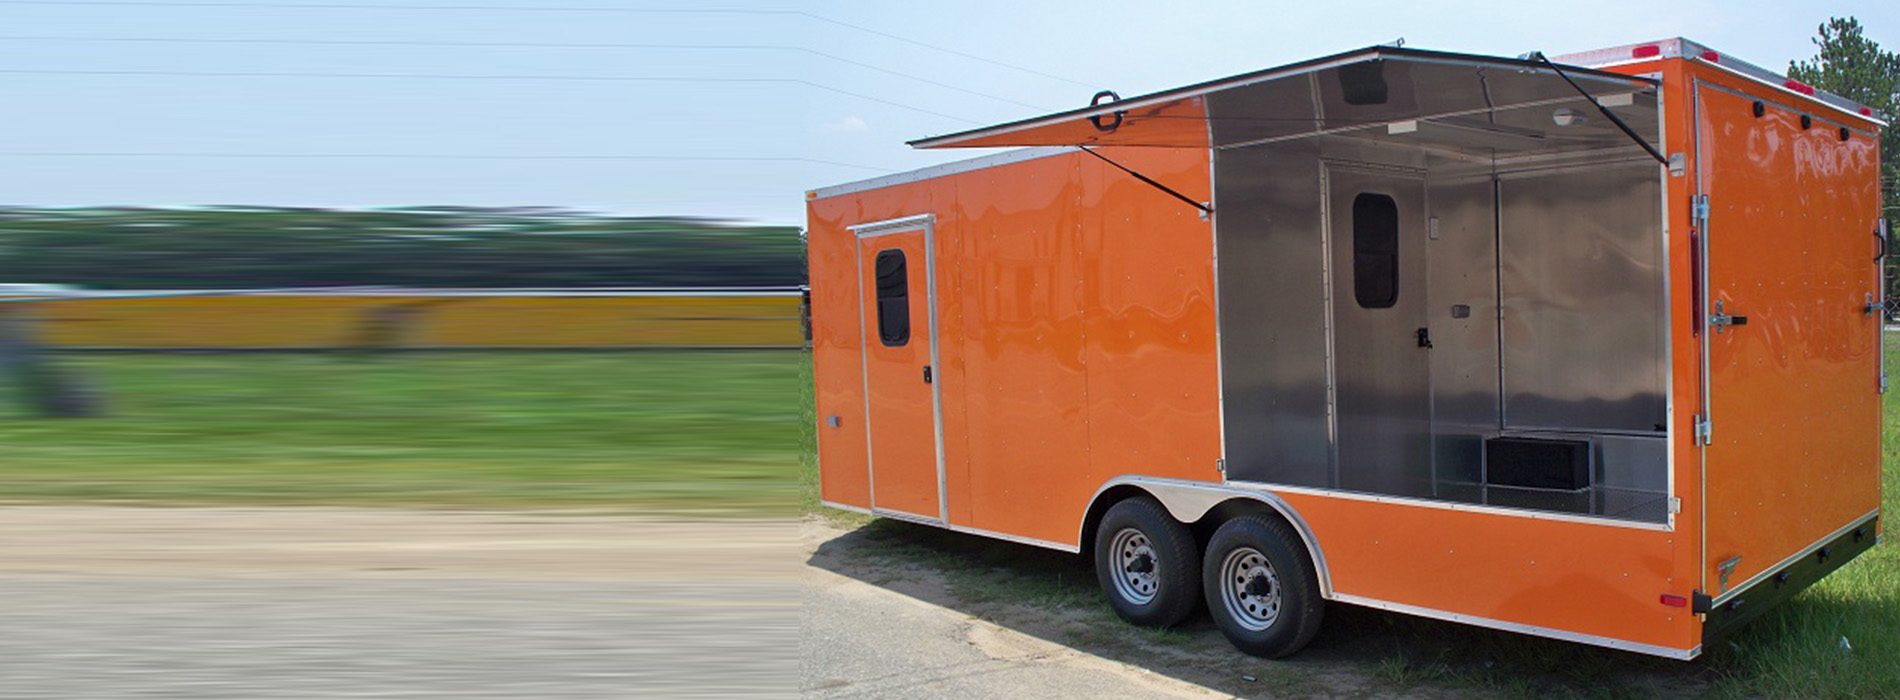 An orange food truck parked on a gravel surface.